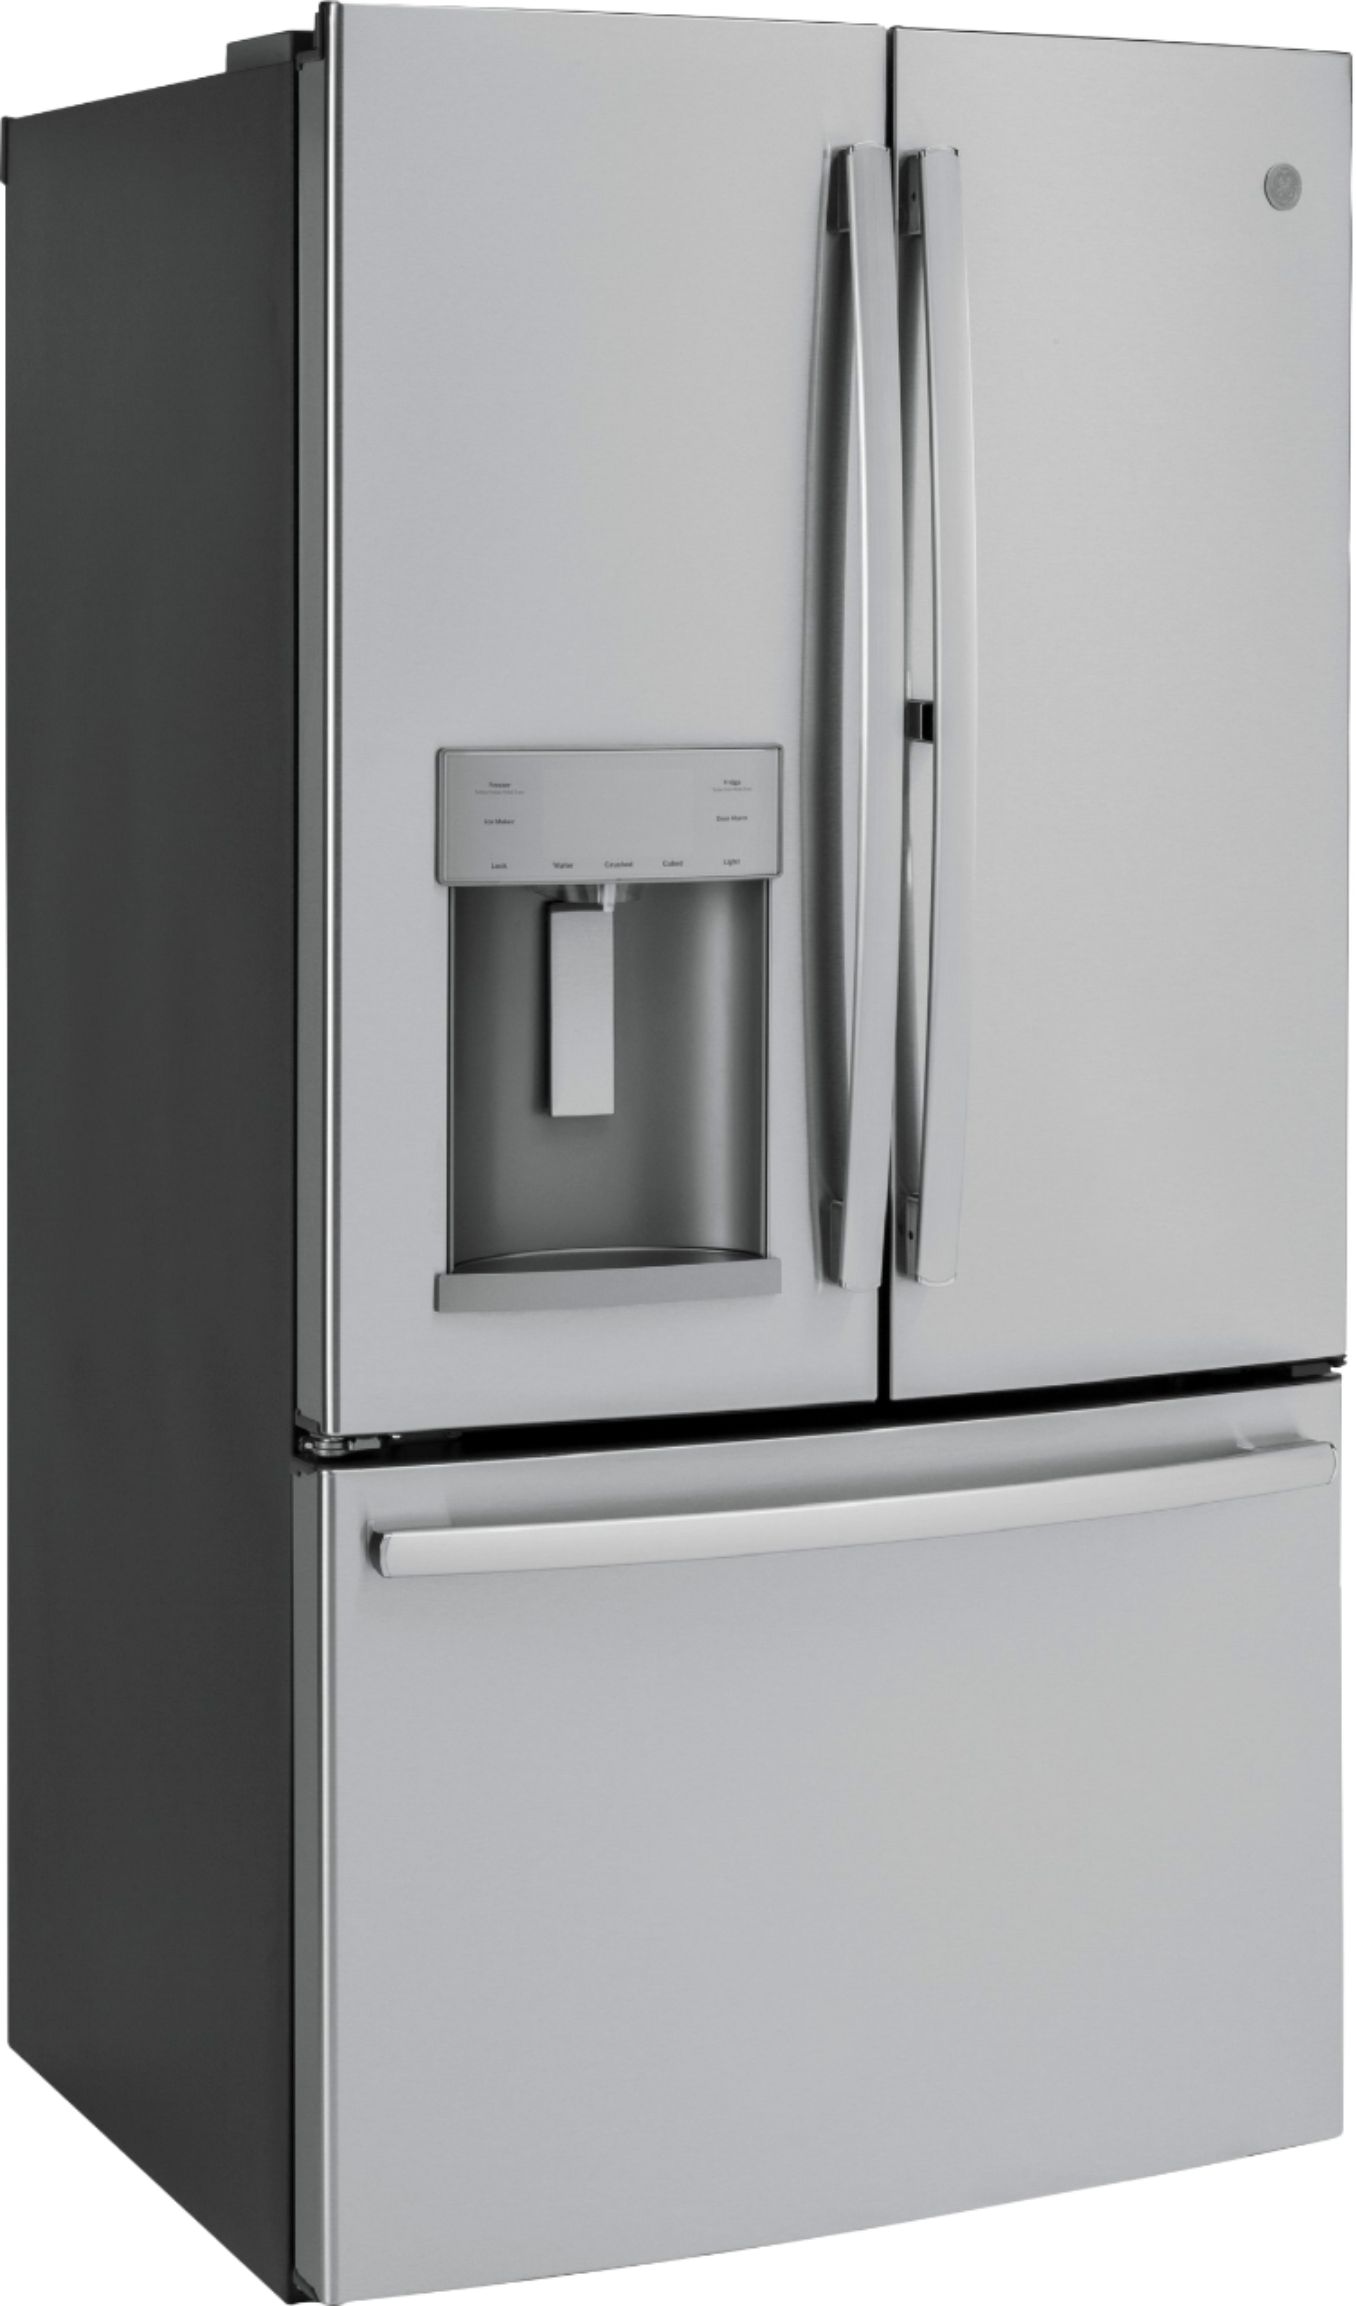 Angle View: Viking - Professional 5 Series Quiet Cool 25.3 Cu. Ft. Side-by-Side Built-In Refrigerator - San marzano red